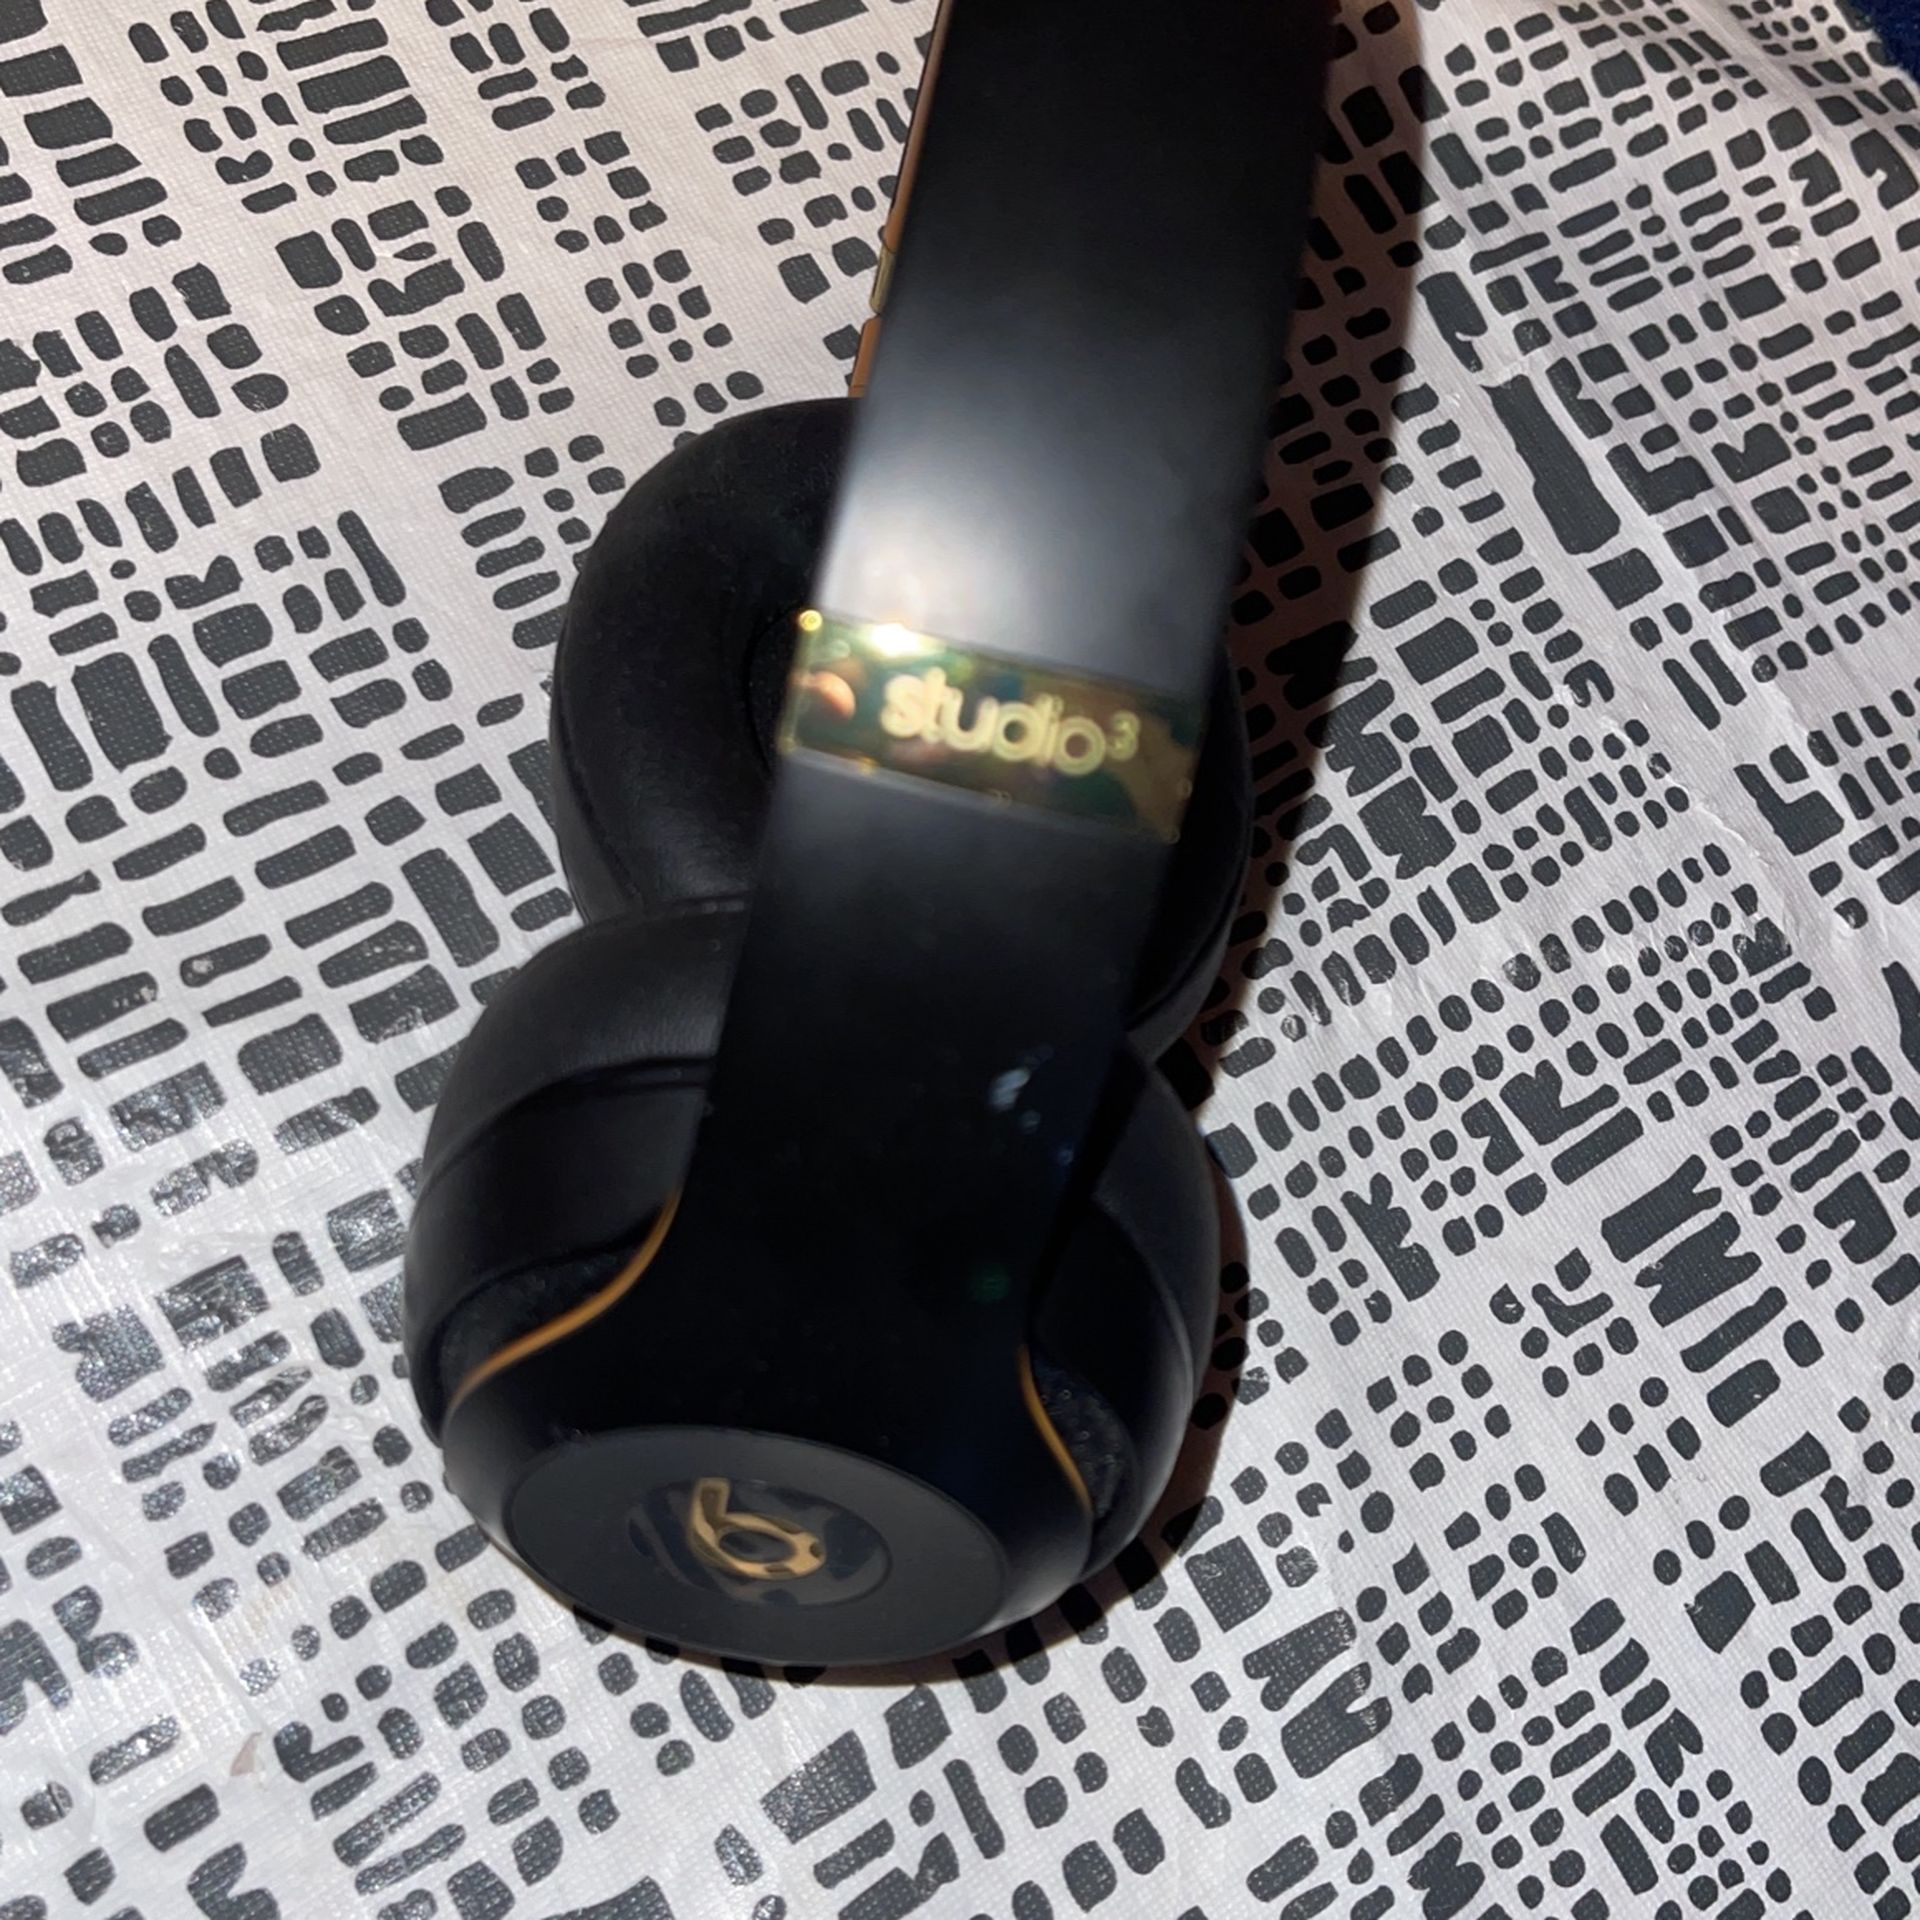 Beats Studio3 - Black With Gold And Peanut butter 